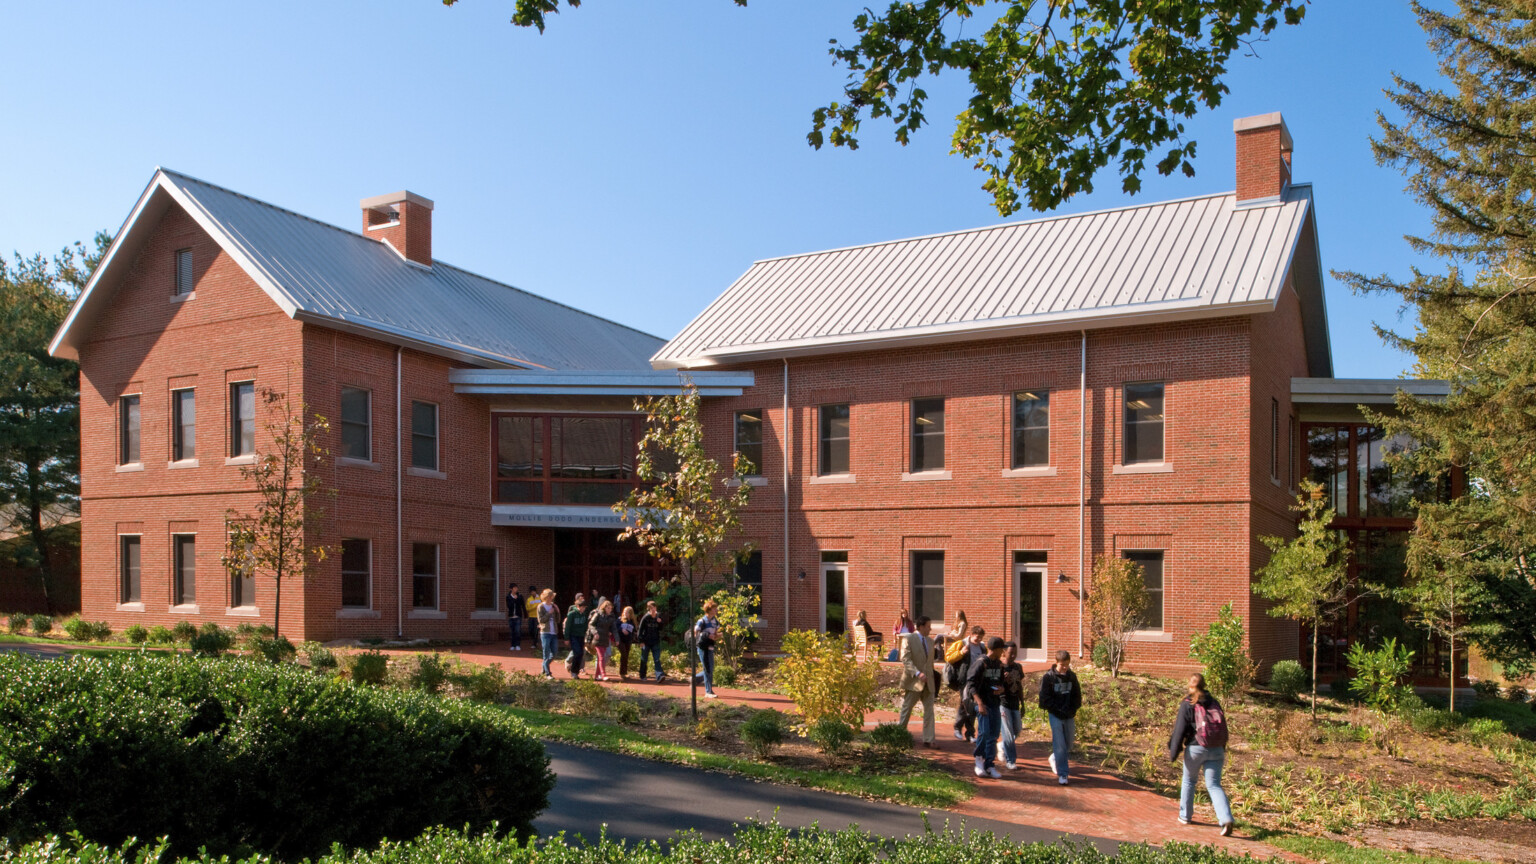 George School's Mollie Dodd Anderson Library & Learning Commons, a 3-story brick building with recessed glass entry